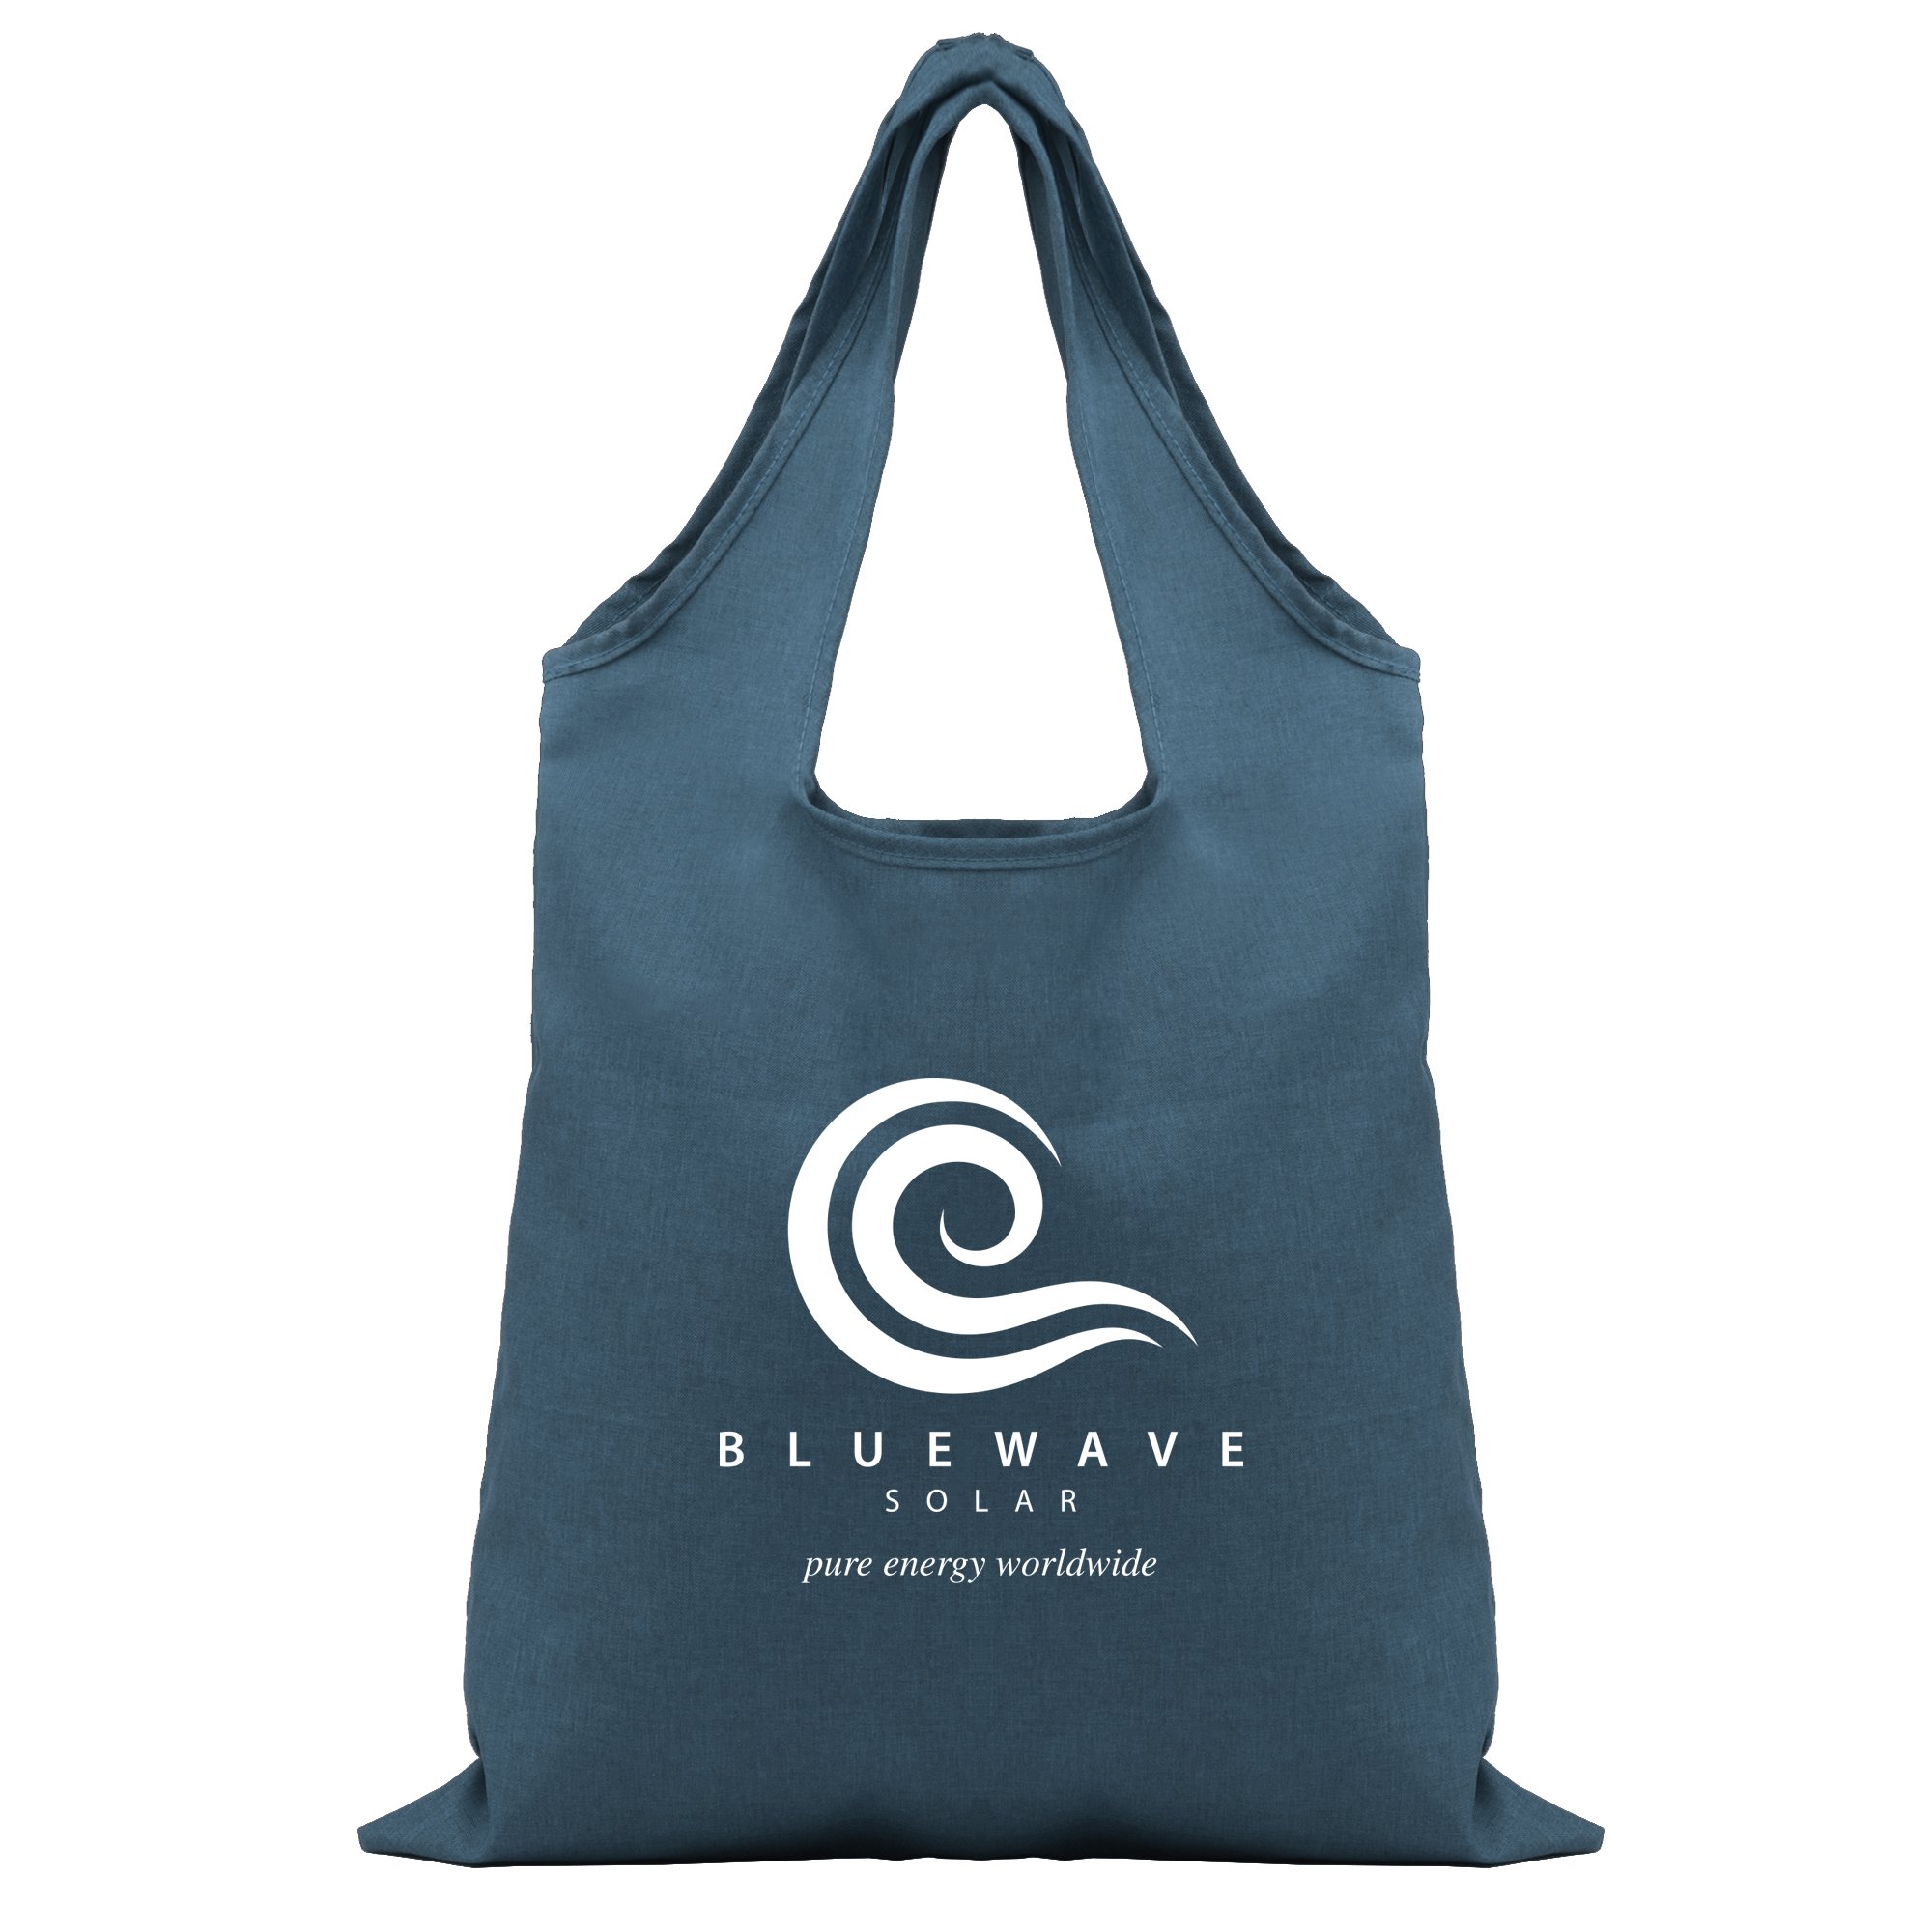 Chaya Tote - Promotional Polyester Tote Bag with Logo | 0